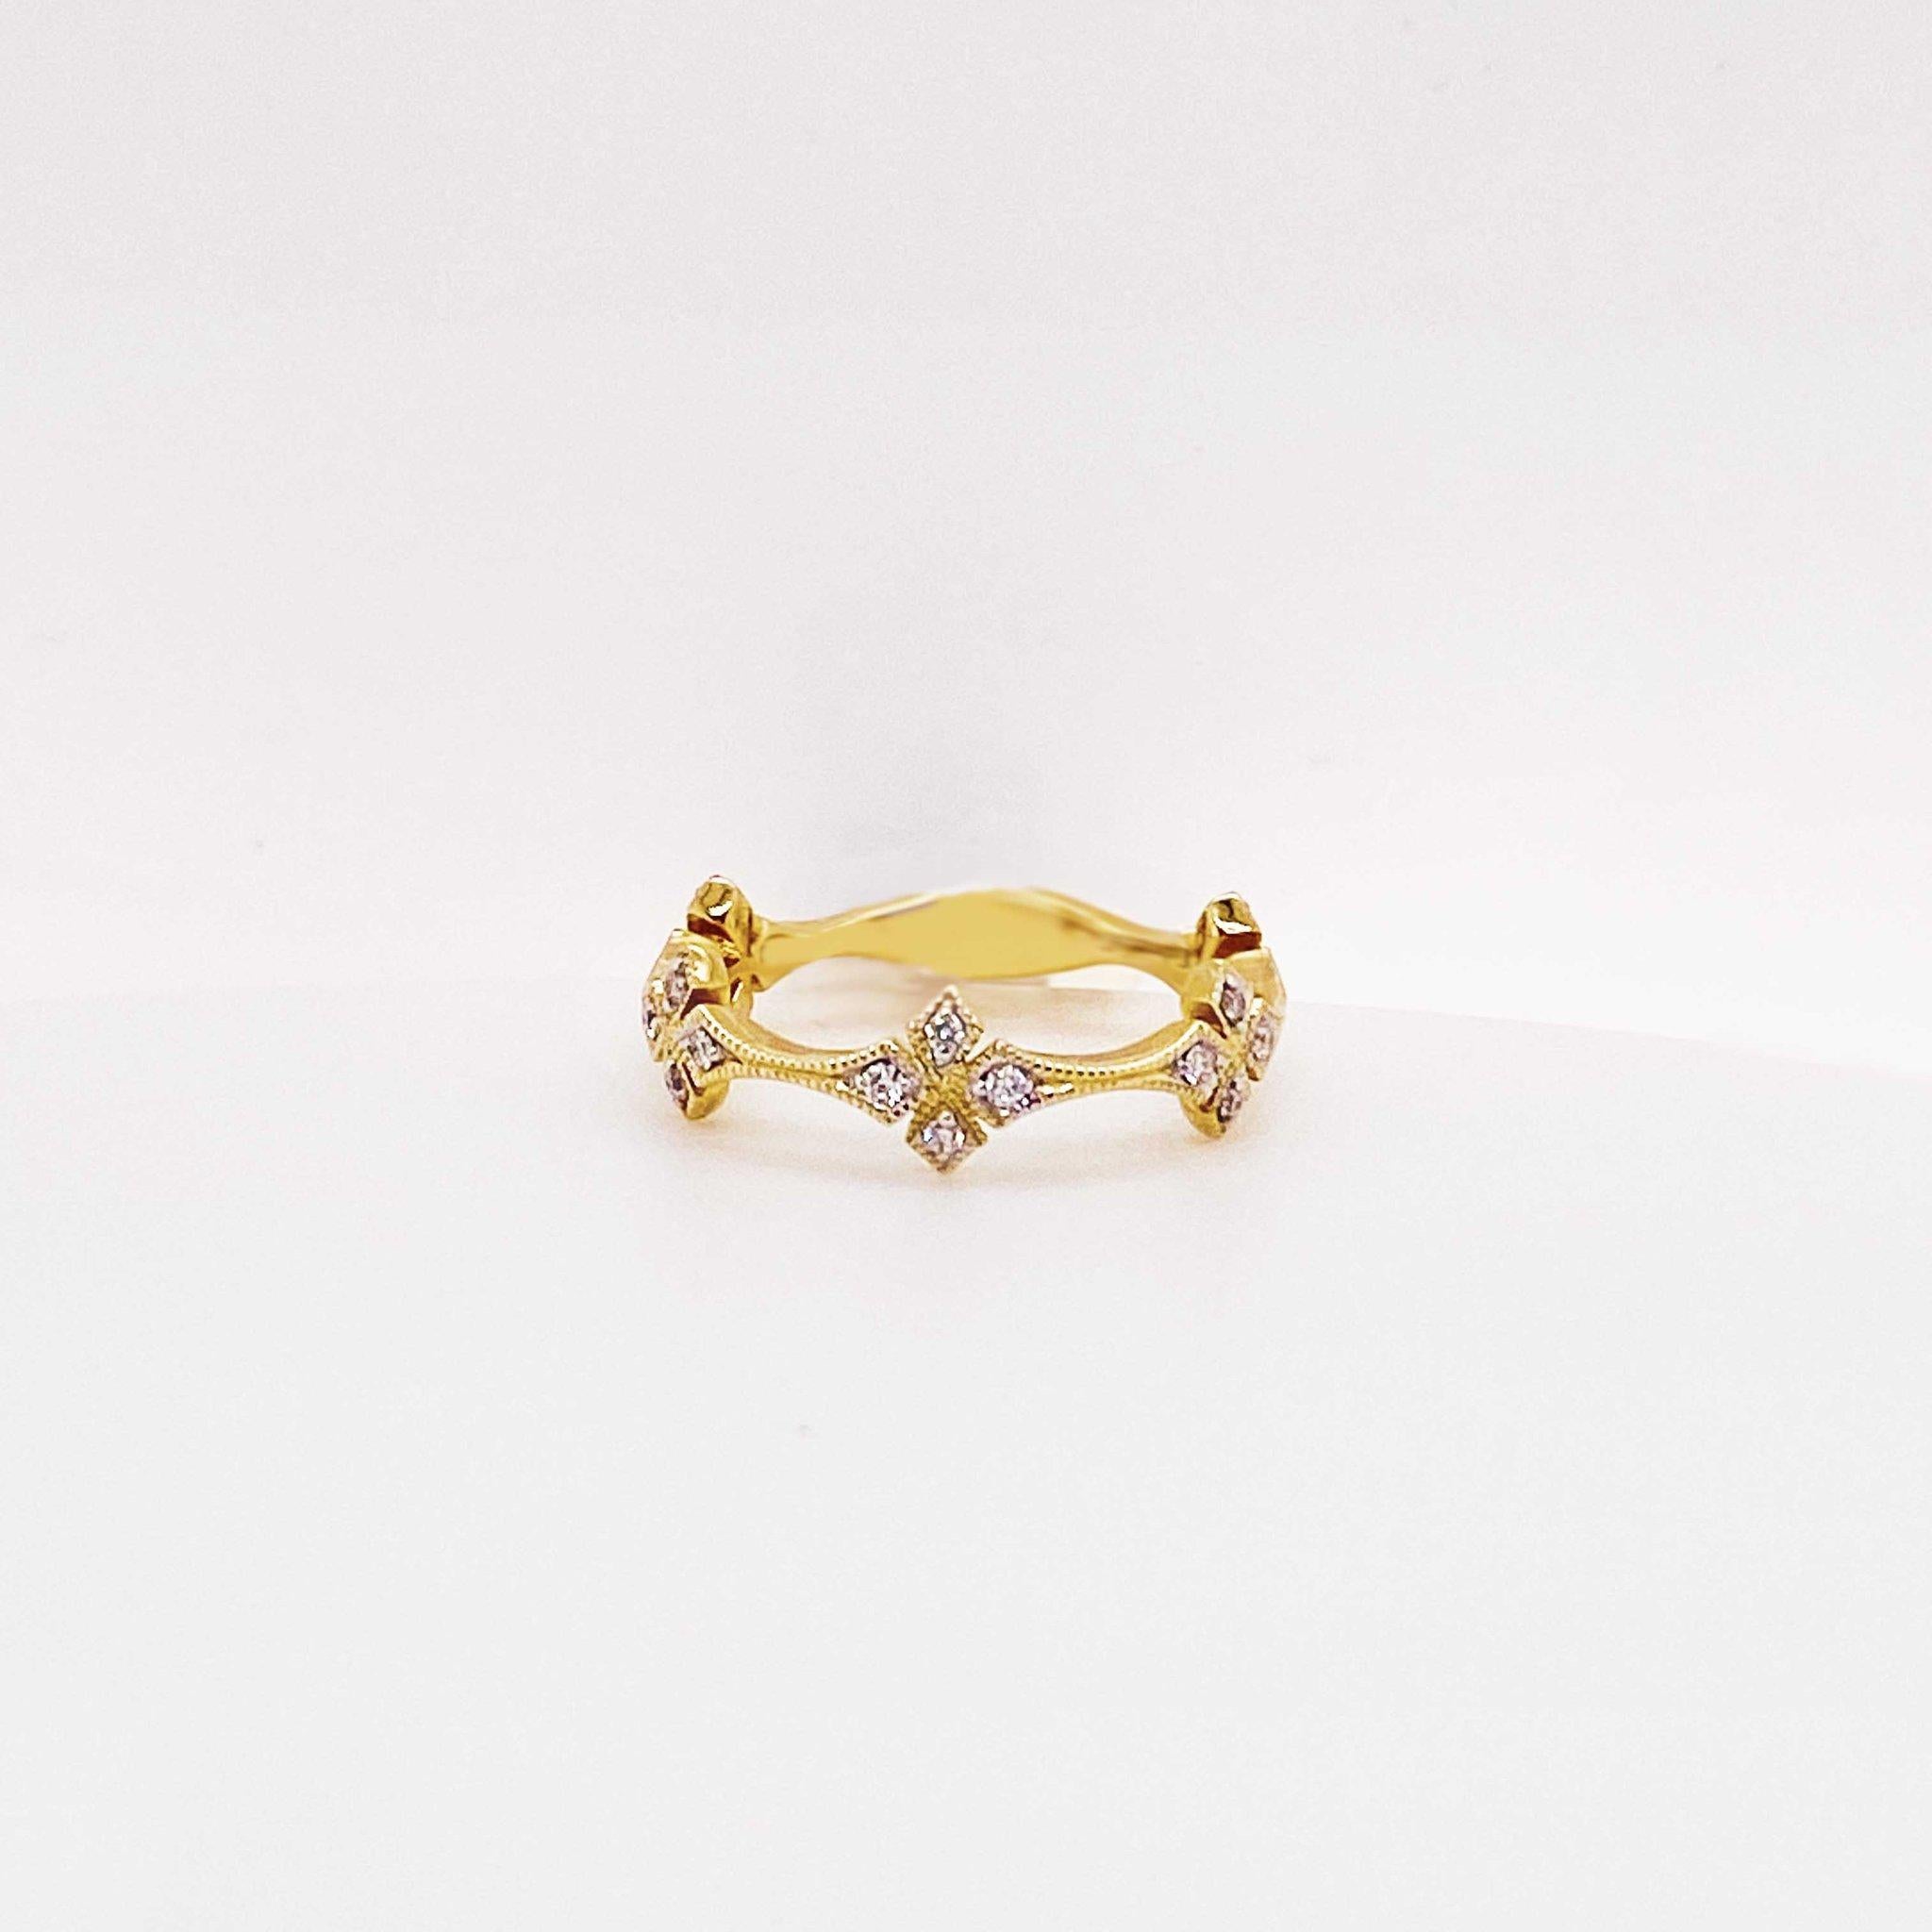 This fun, fashion diamond clover band is a bold and stunning design! The 14 karat yellow gold diamond band has a clover design with diamond clovers going 3/4 around the band. The clover has four petals, each set with a round brilliant diamond on